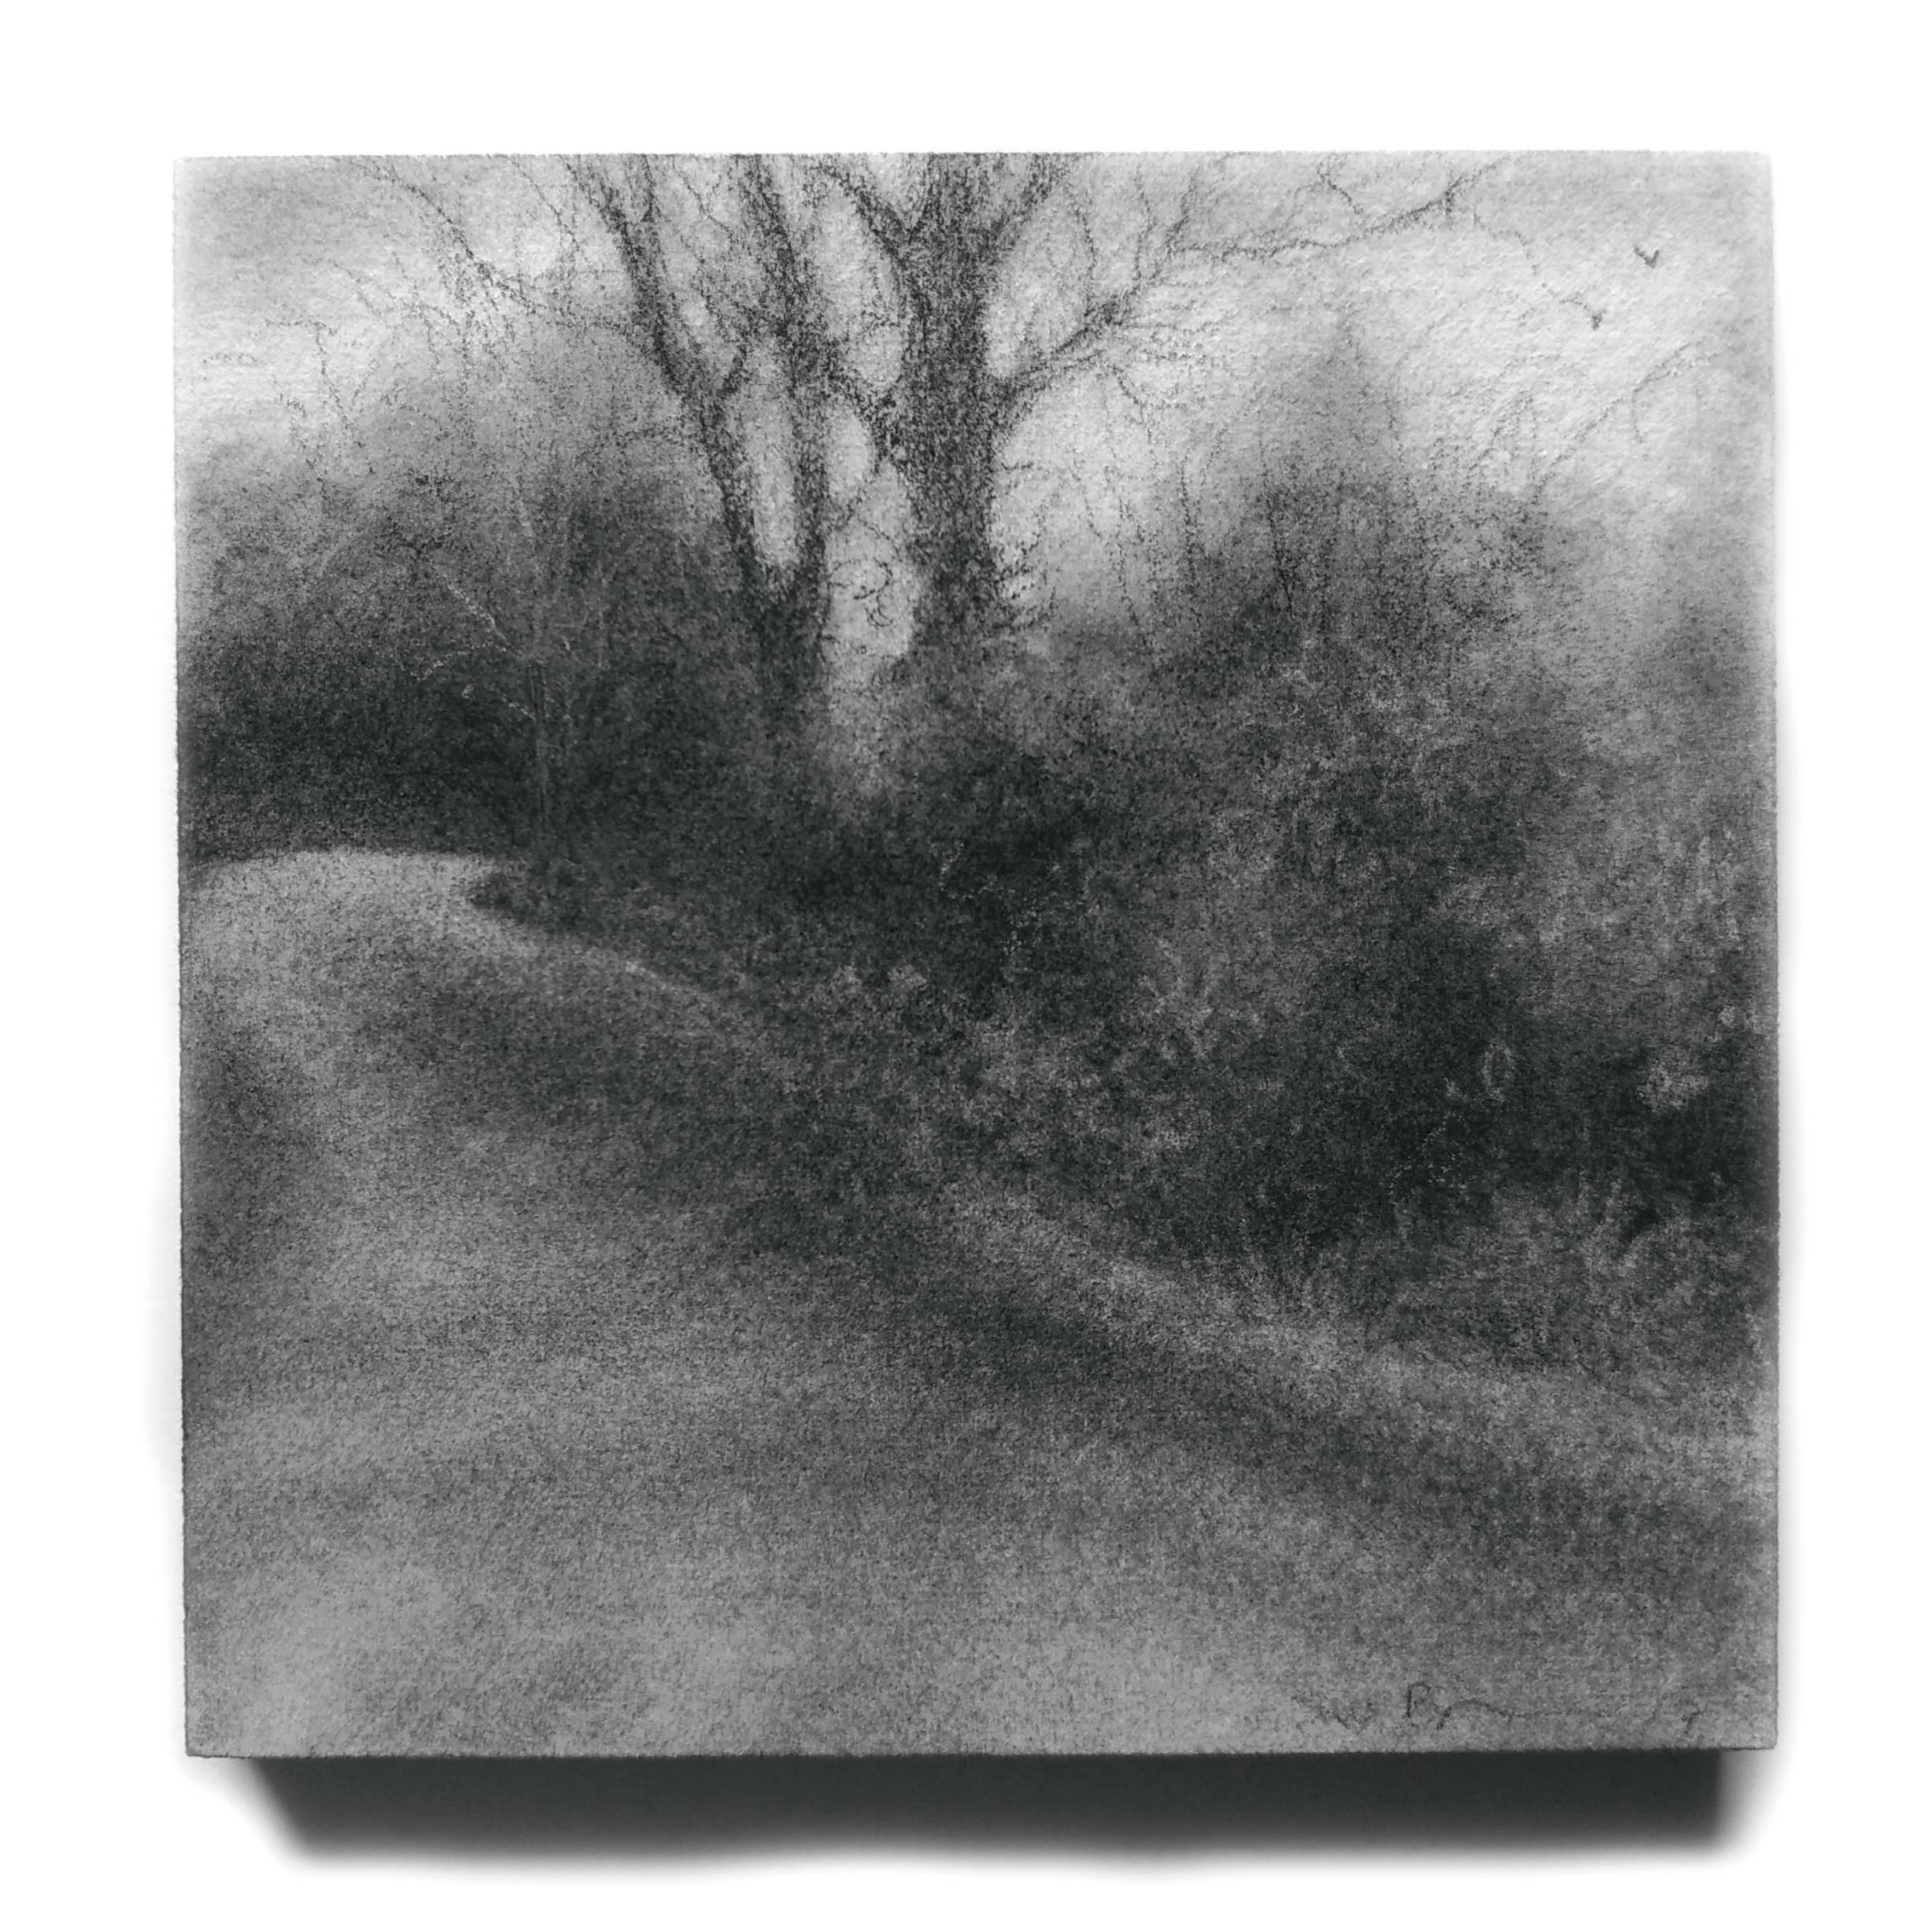 Edgeland XLVII (Modern, Square Charcoal Landscape Drawing of Country Road) - Art by Sue Bryan